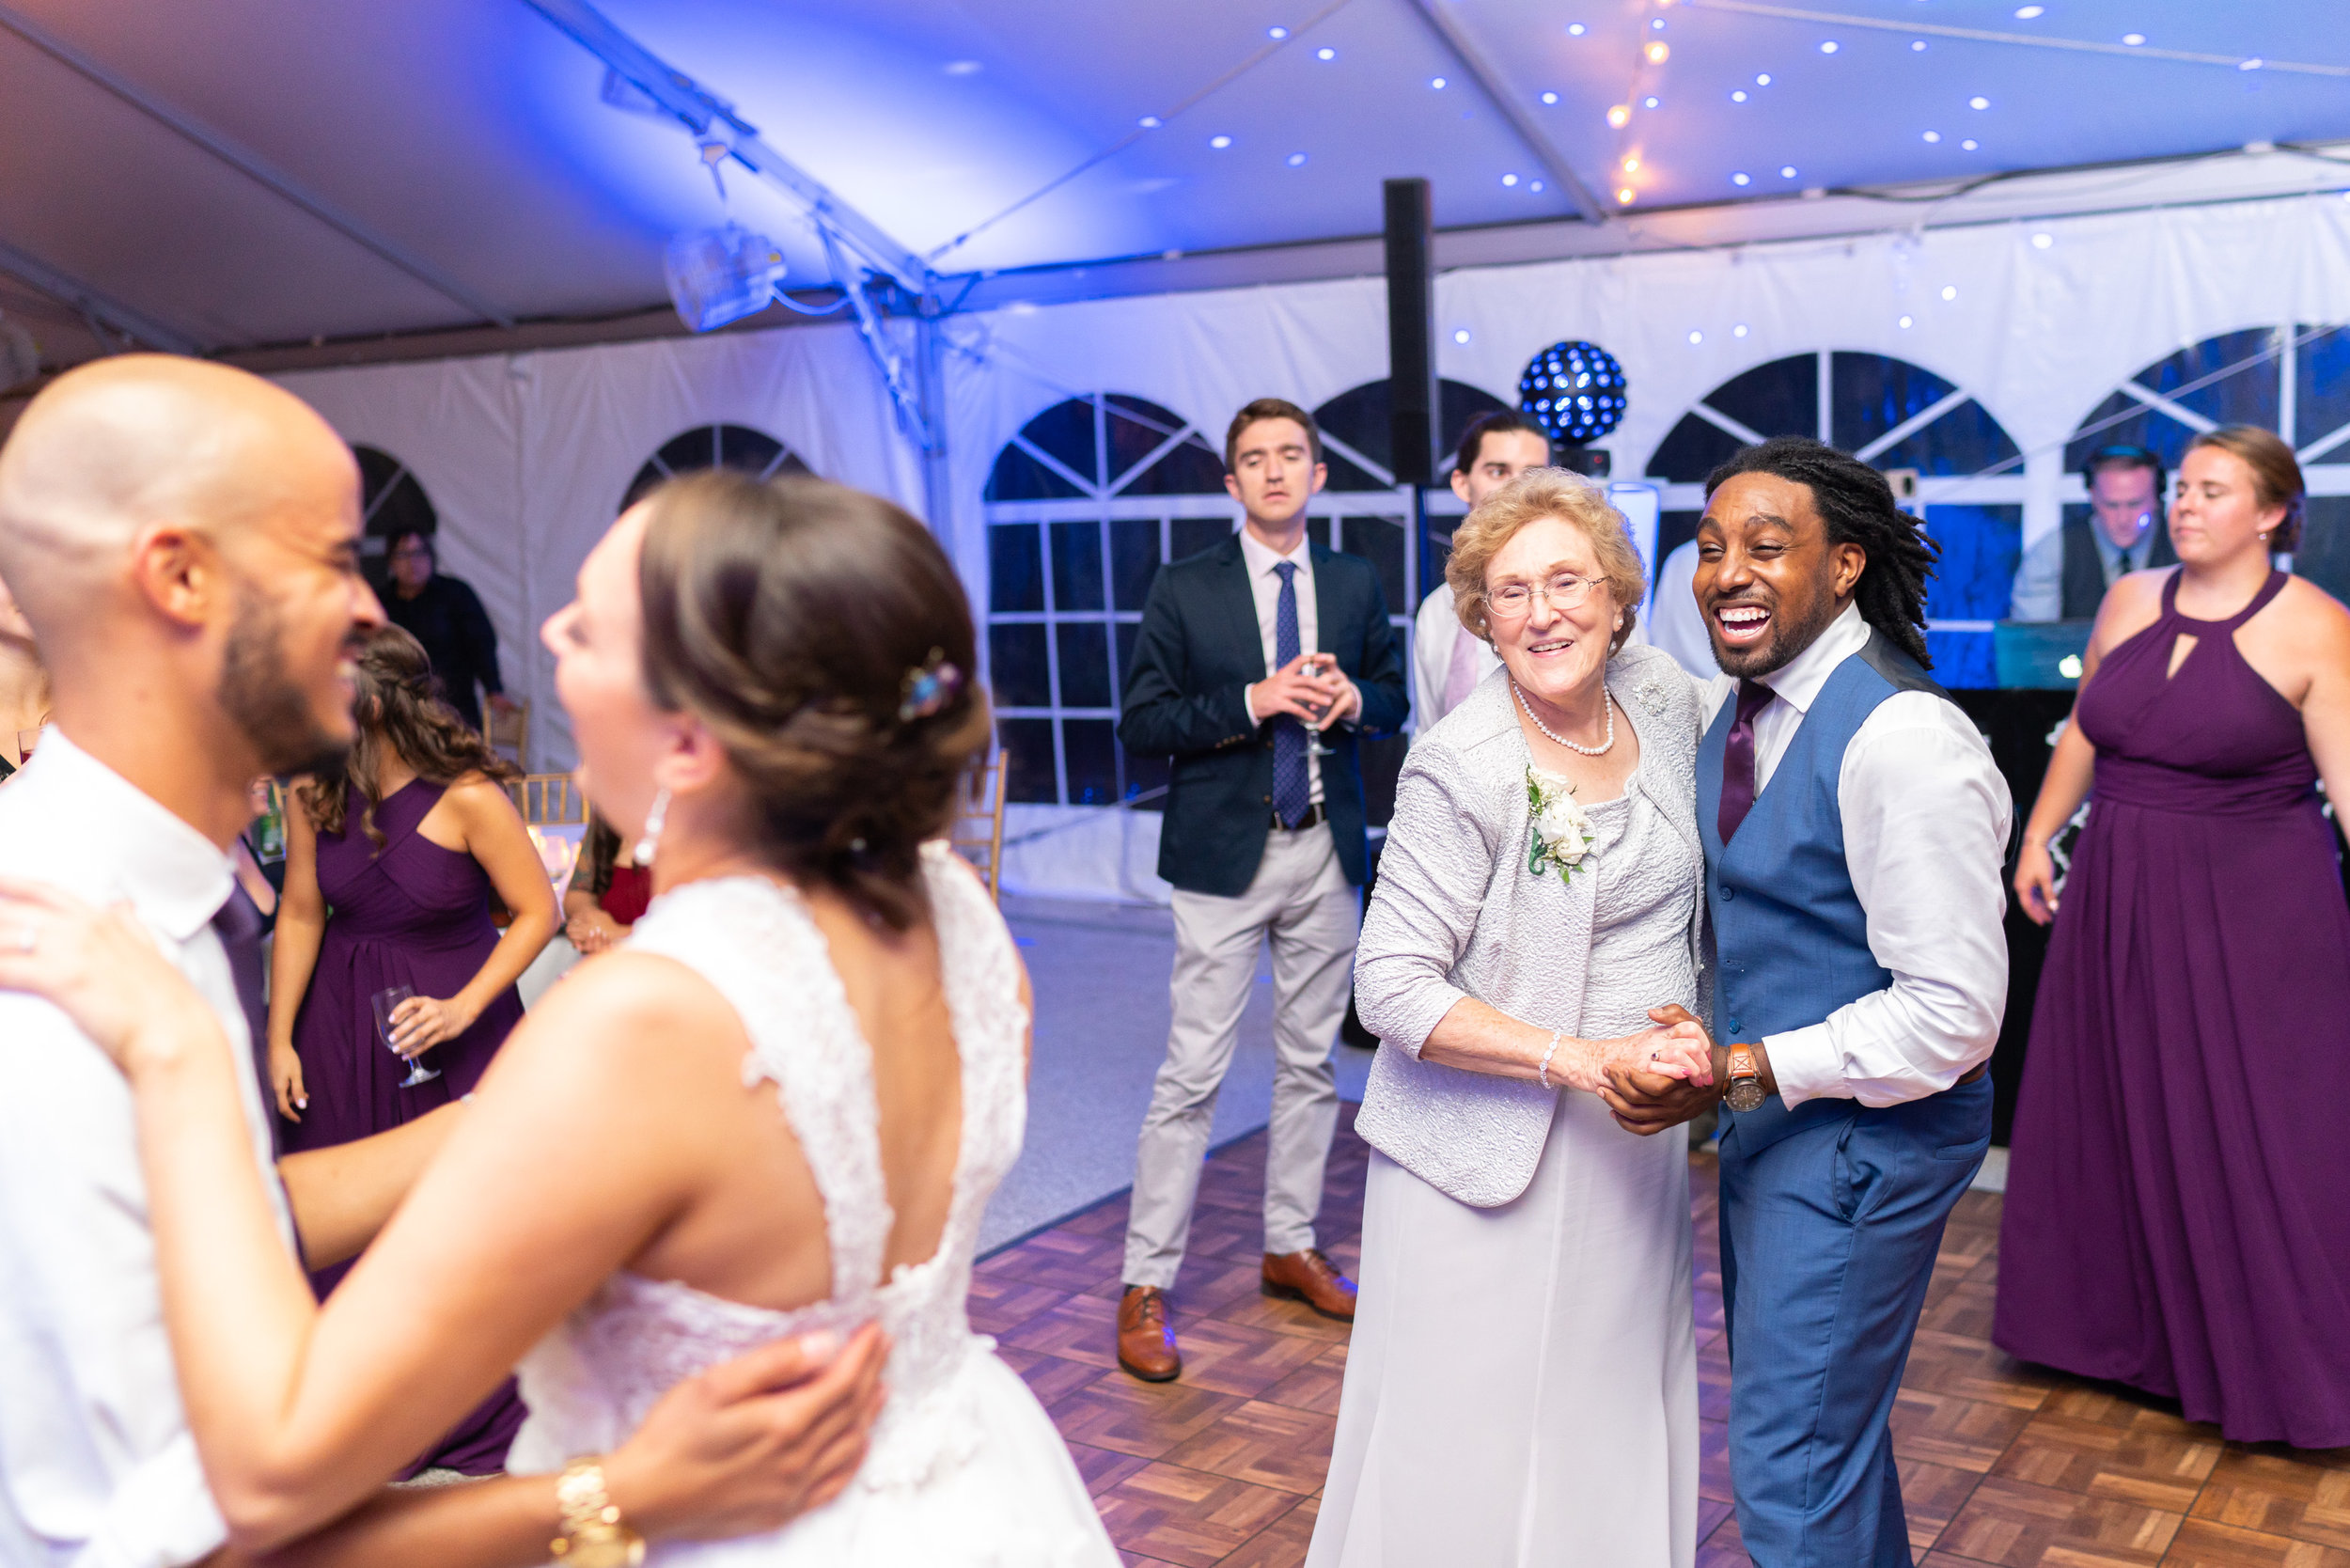 Guests dancing with bride and groom at Rust Manor House